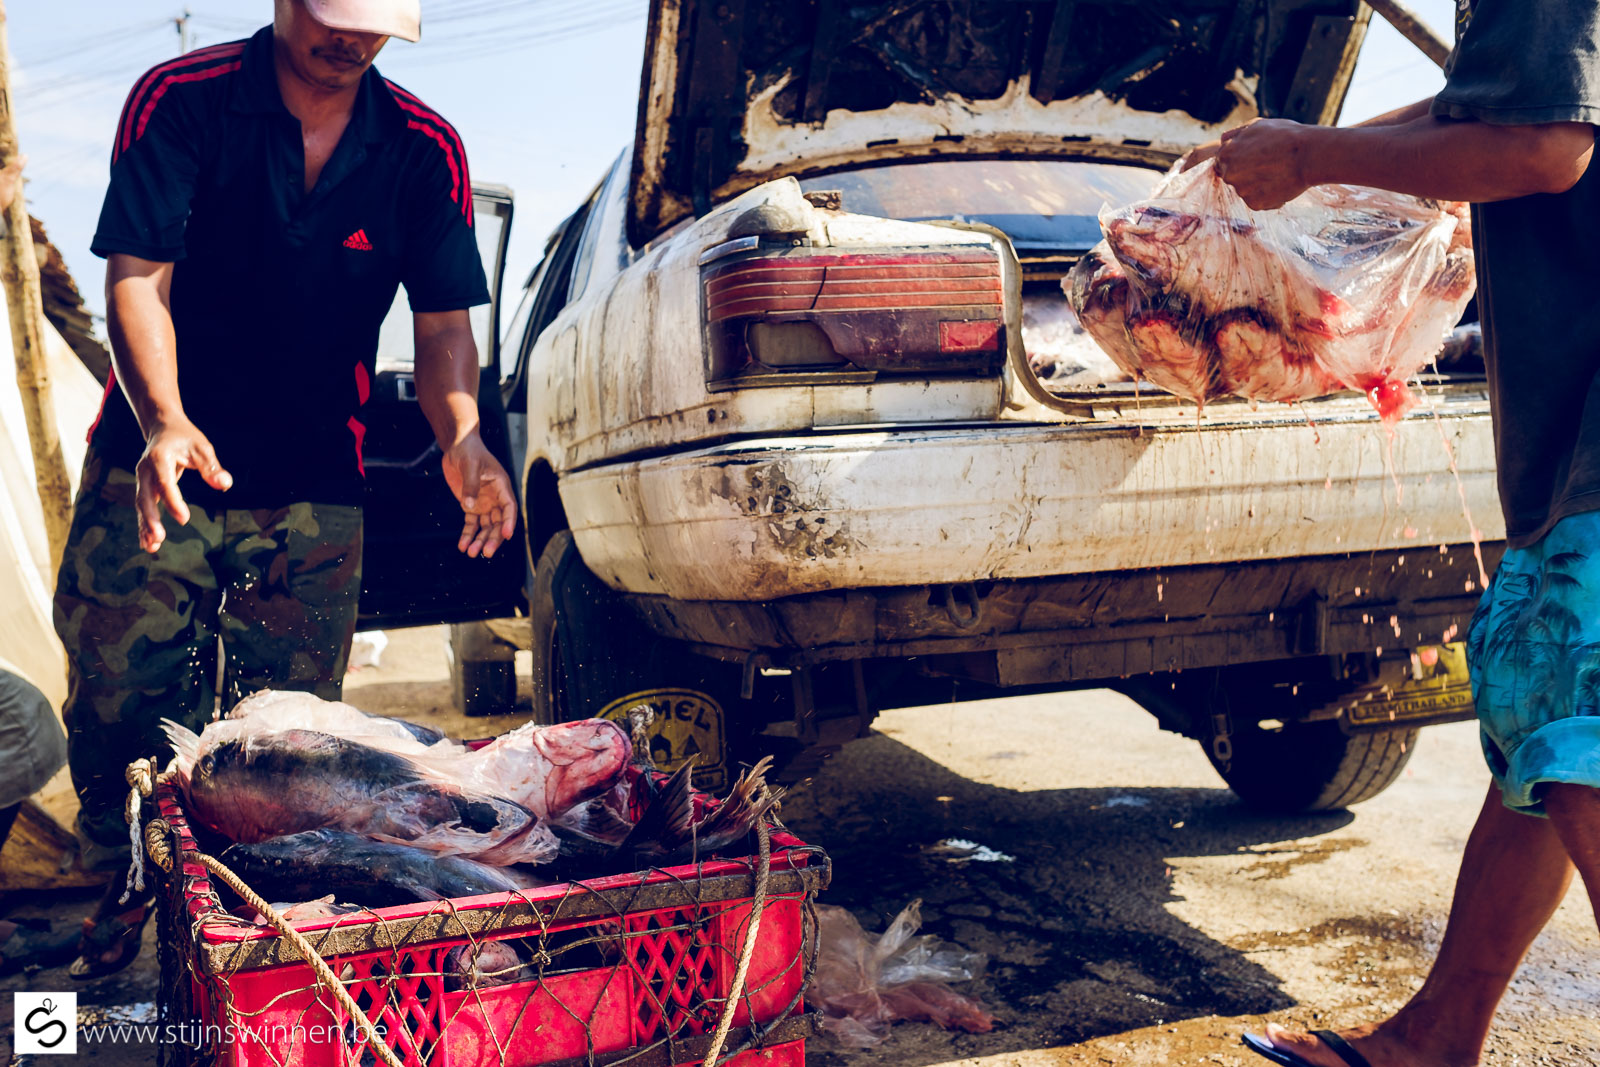 Unloading fish out of car